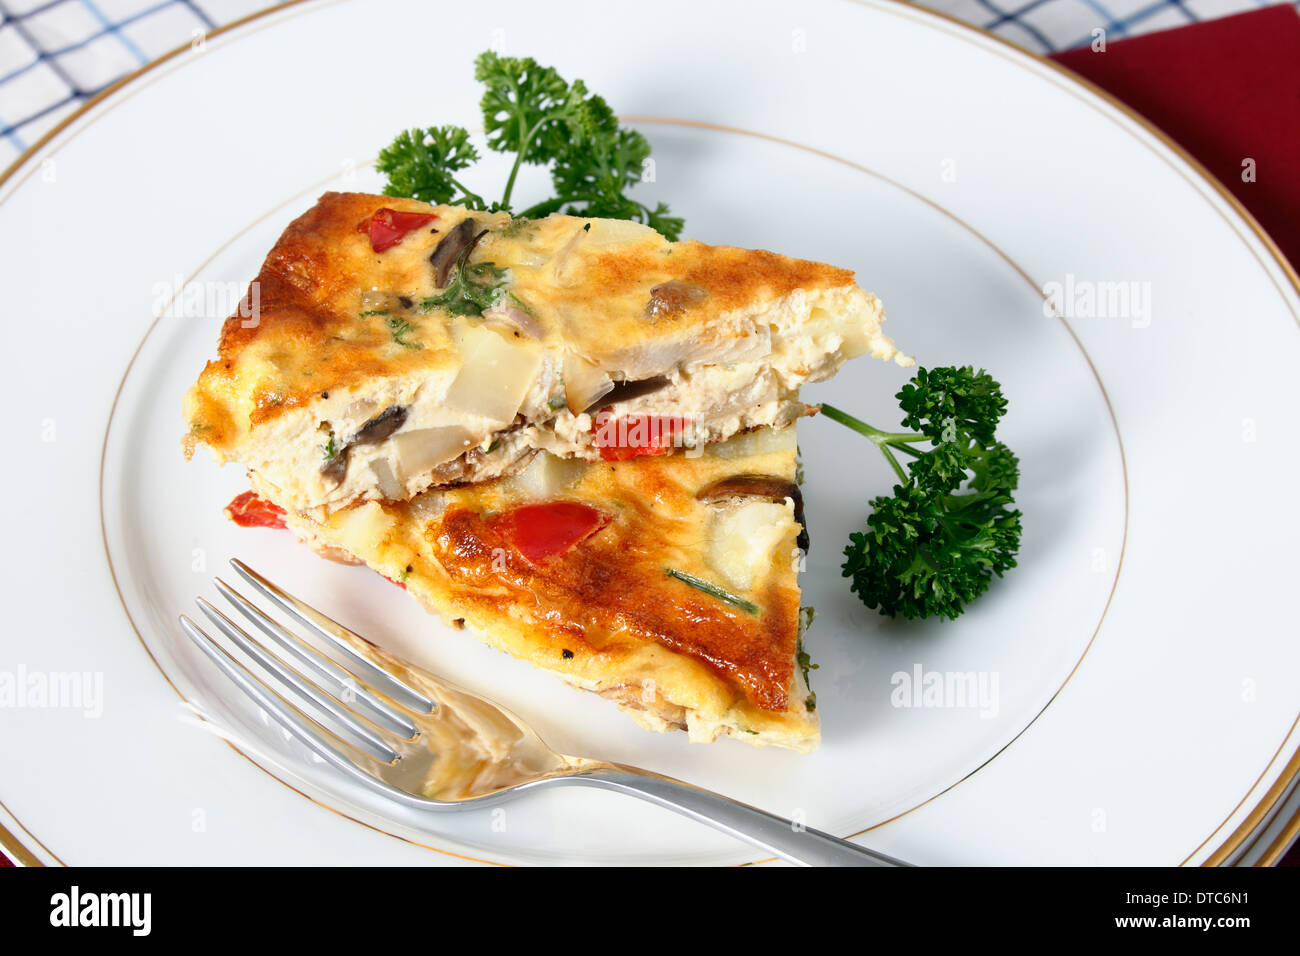 Slices of Spanish omelette on a plate with a fork. Stock Photo